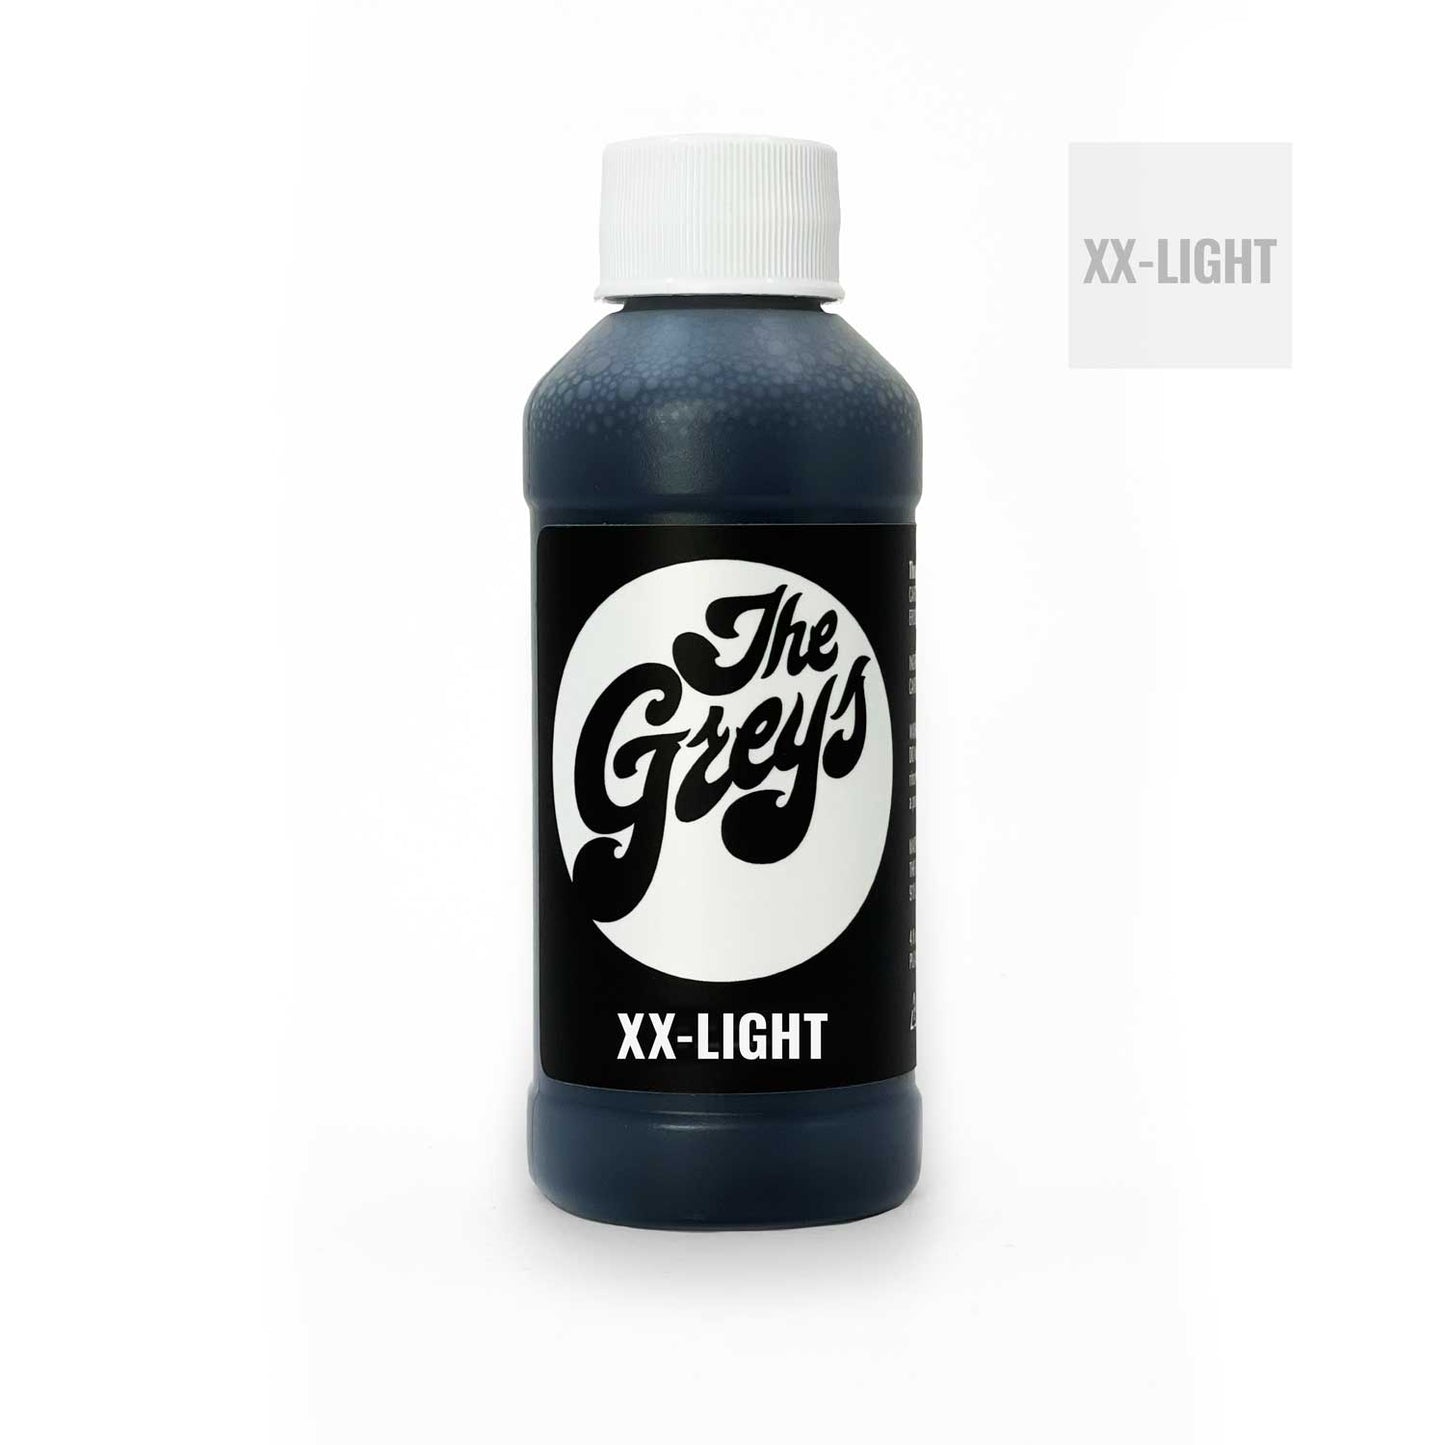 The Greys black carbon wash tattoo ink in XX-Light